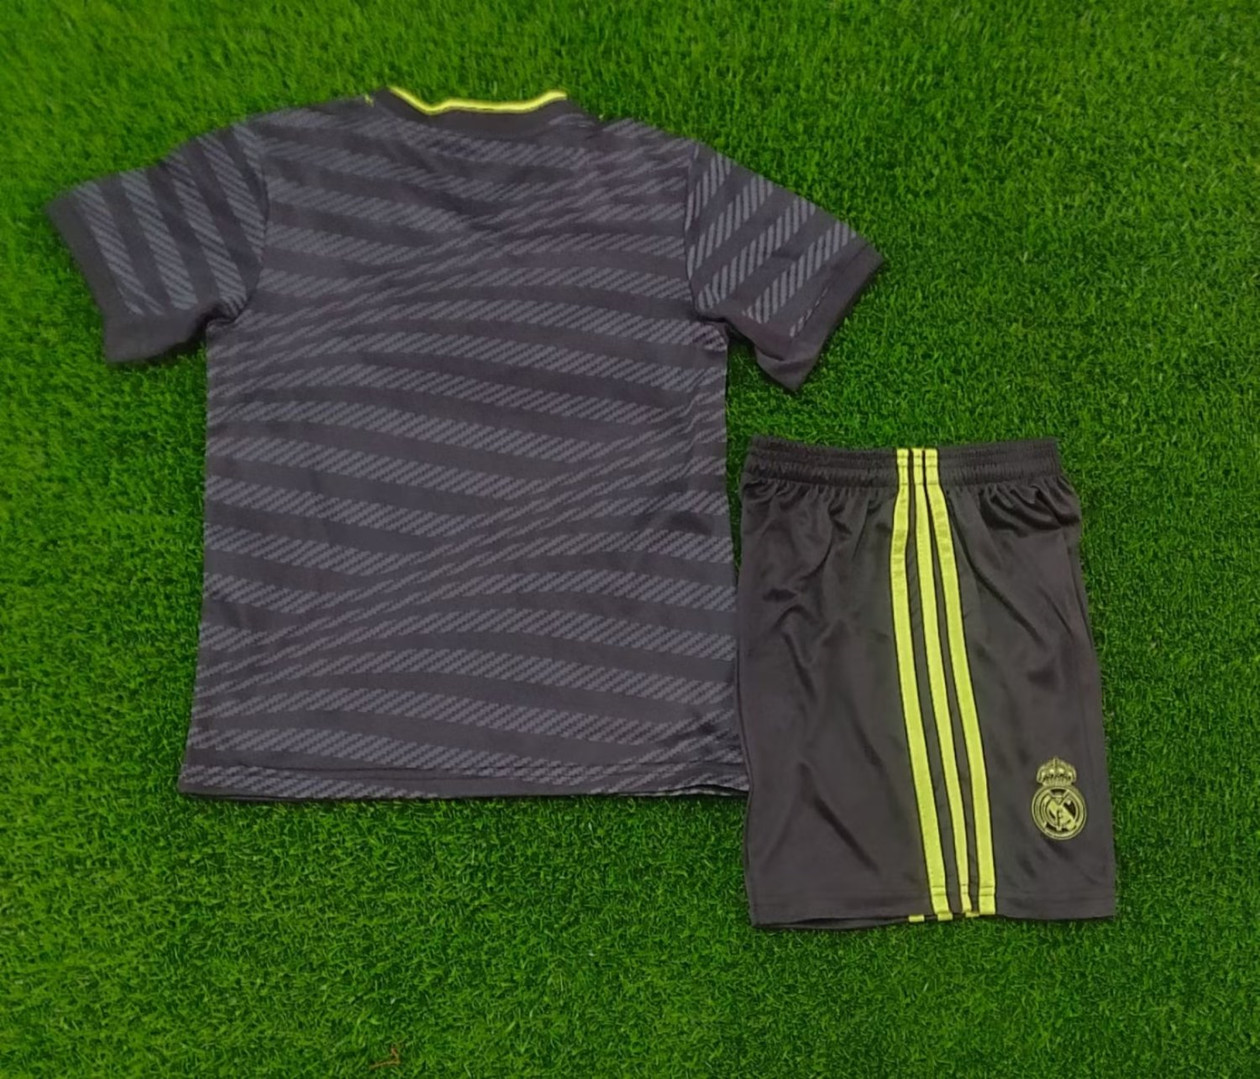 Real Madrid Soccer Jersey + Short Replica Third Youth 2022/23